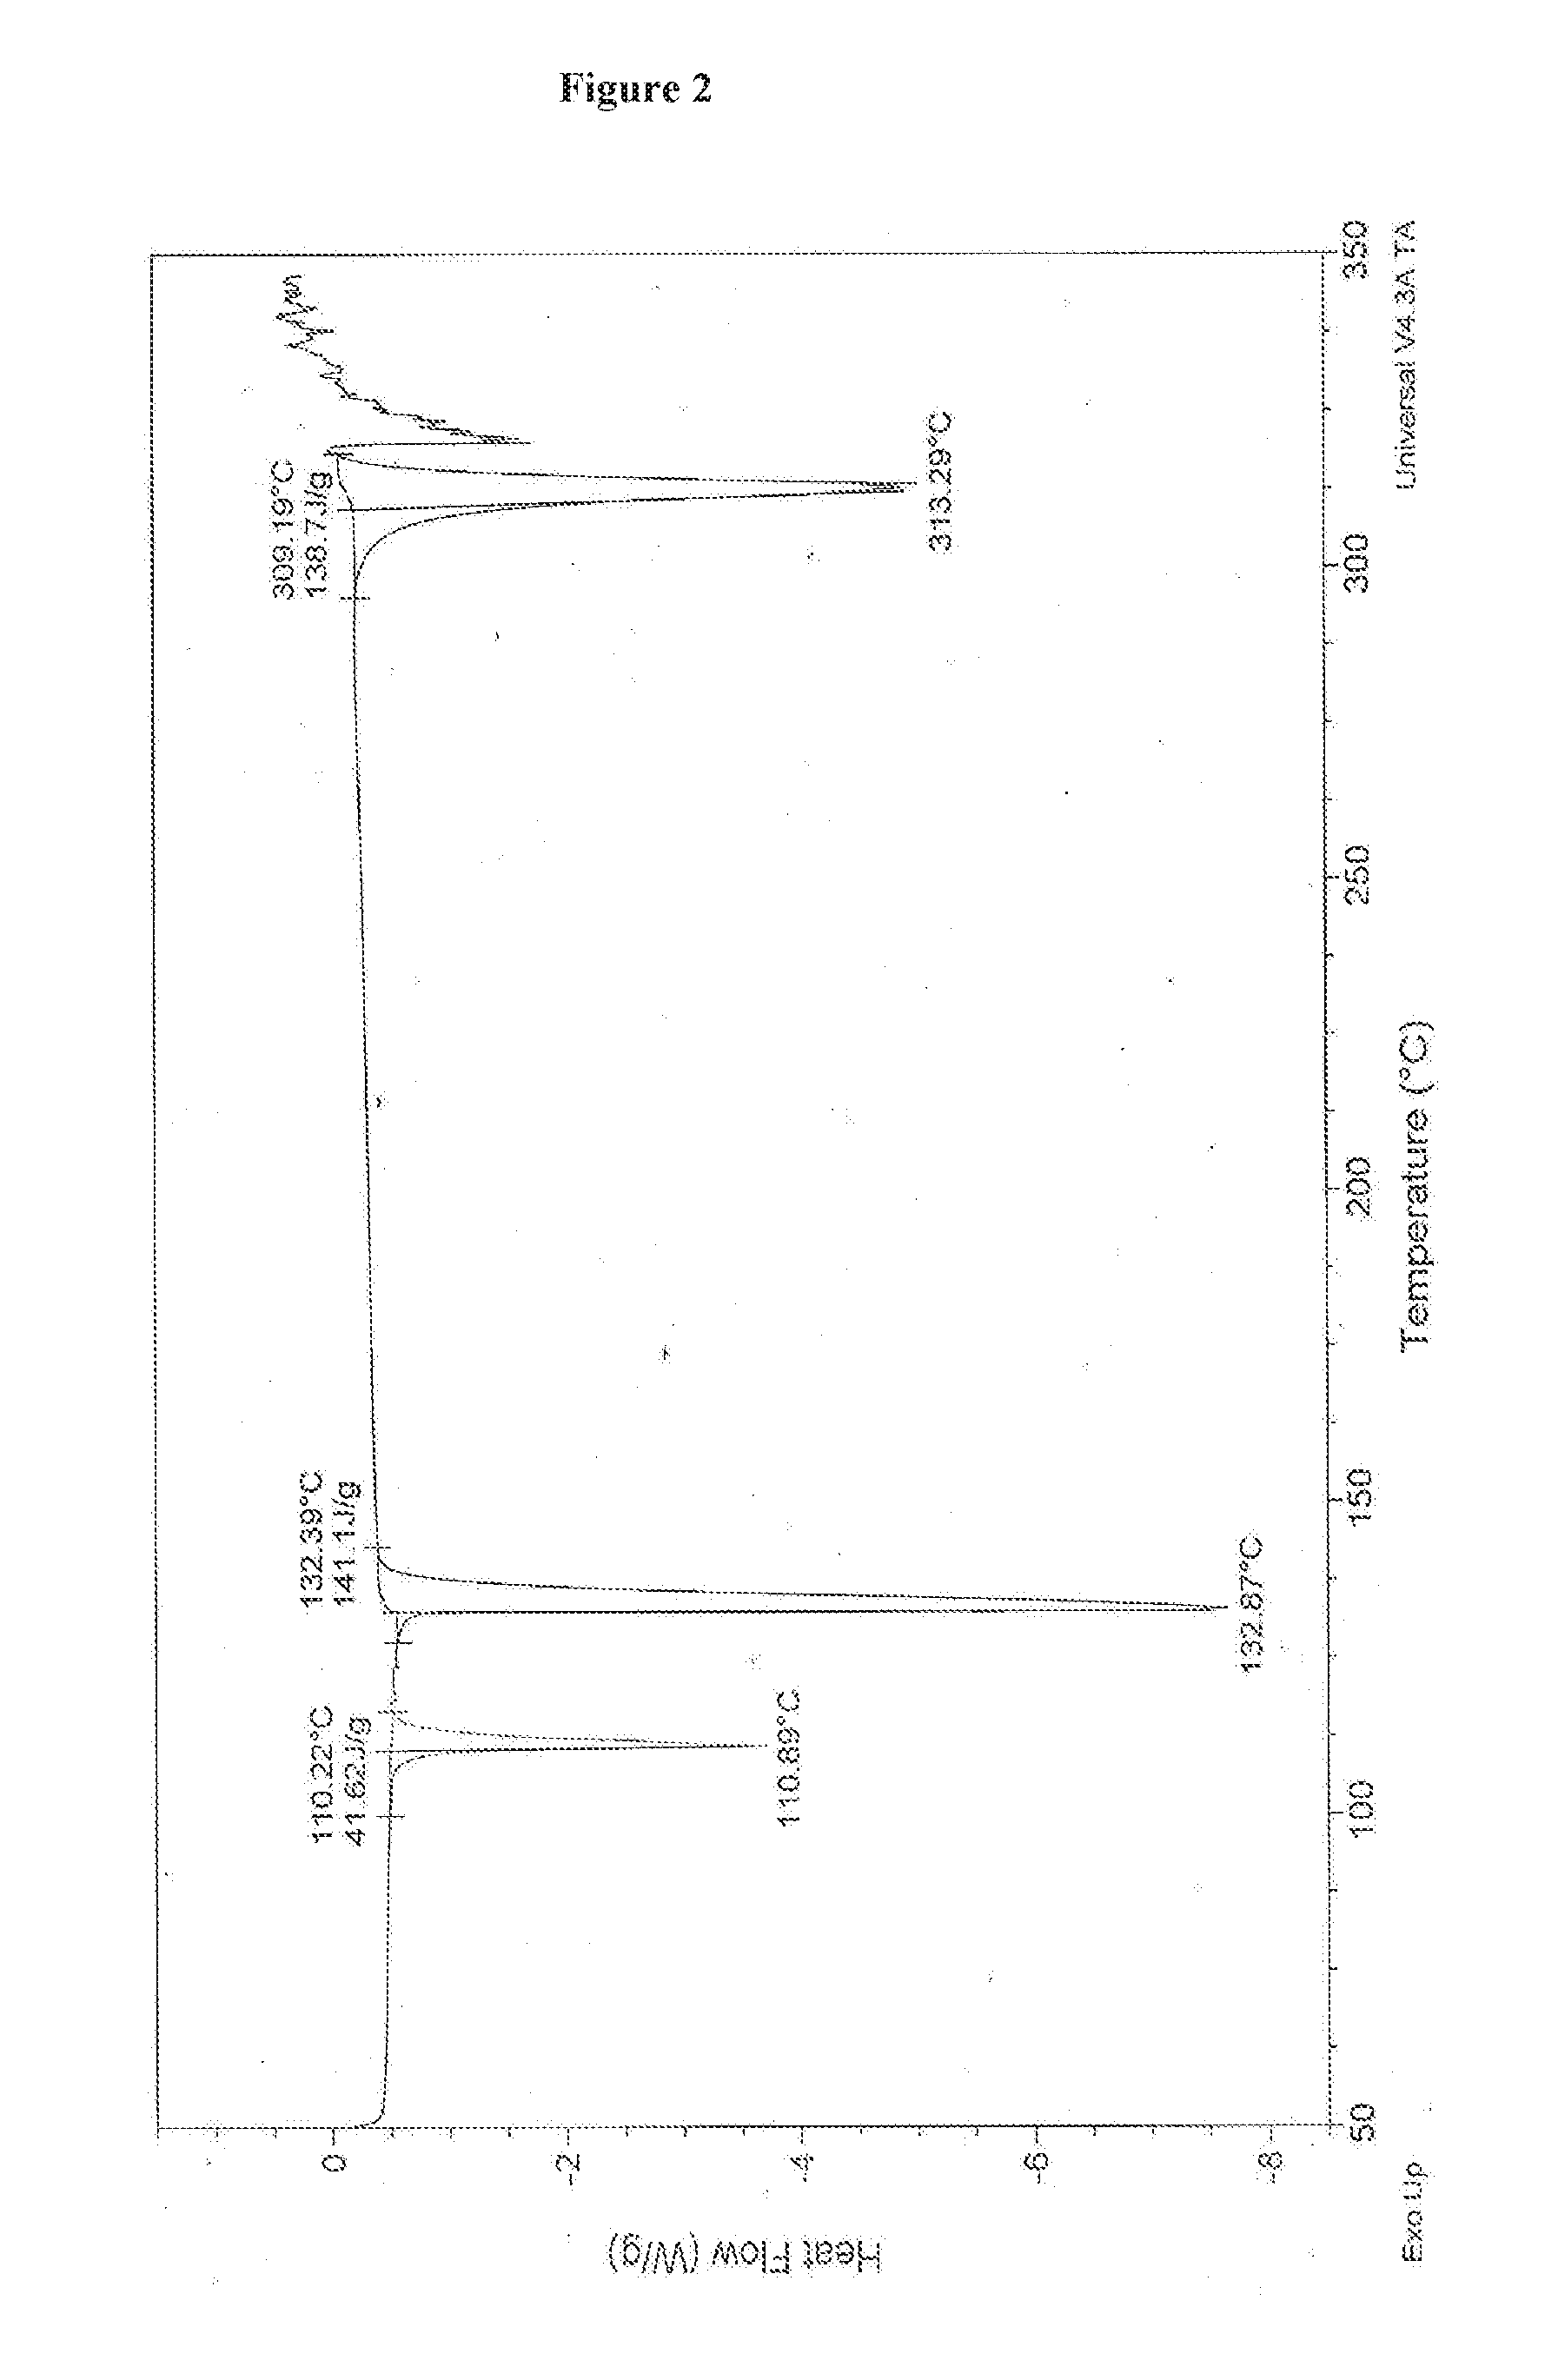 An improved process for the preparation of pazopanib or a pharmaceutically acceptable salt thereof